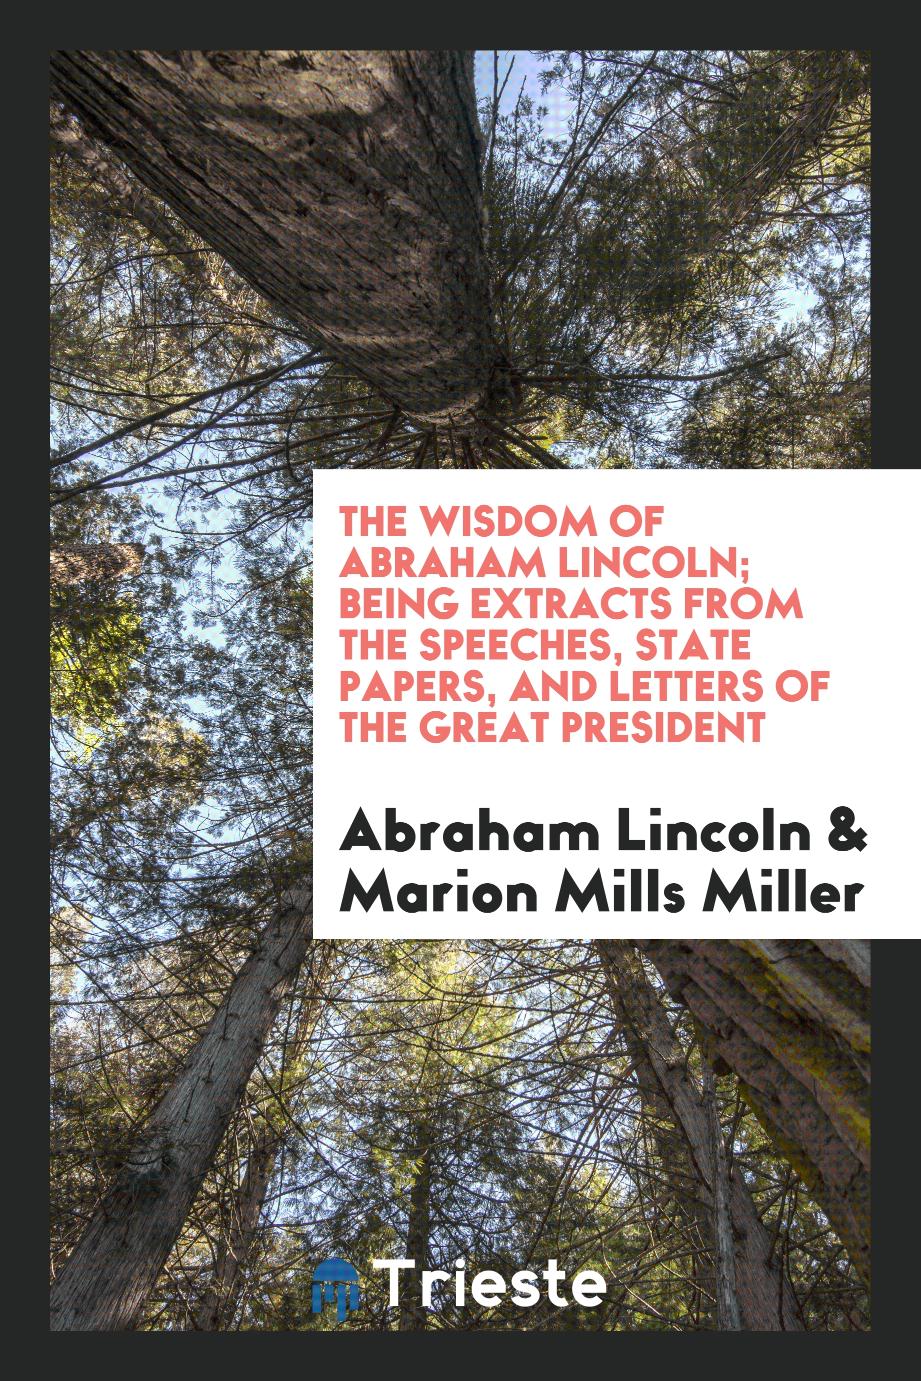 The wisdom of Abraham Lincoln; being extracts from the speeches, state papers, and letters of the great President